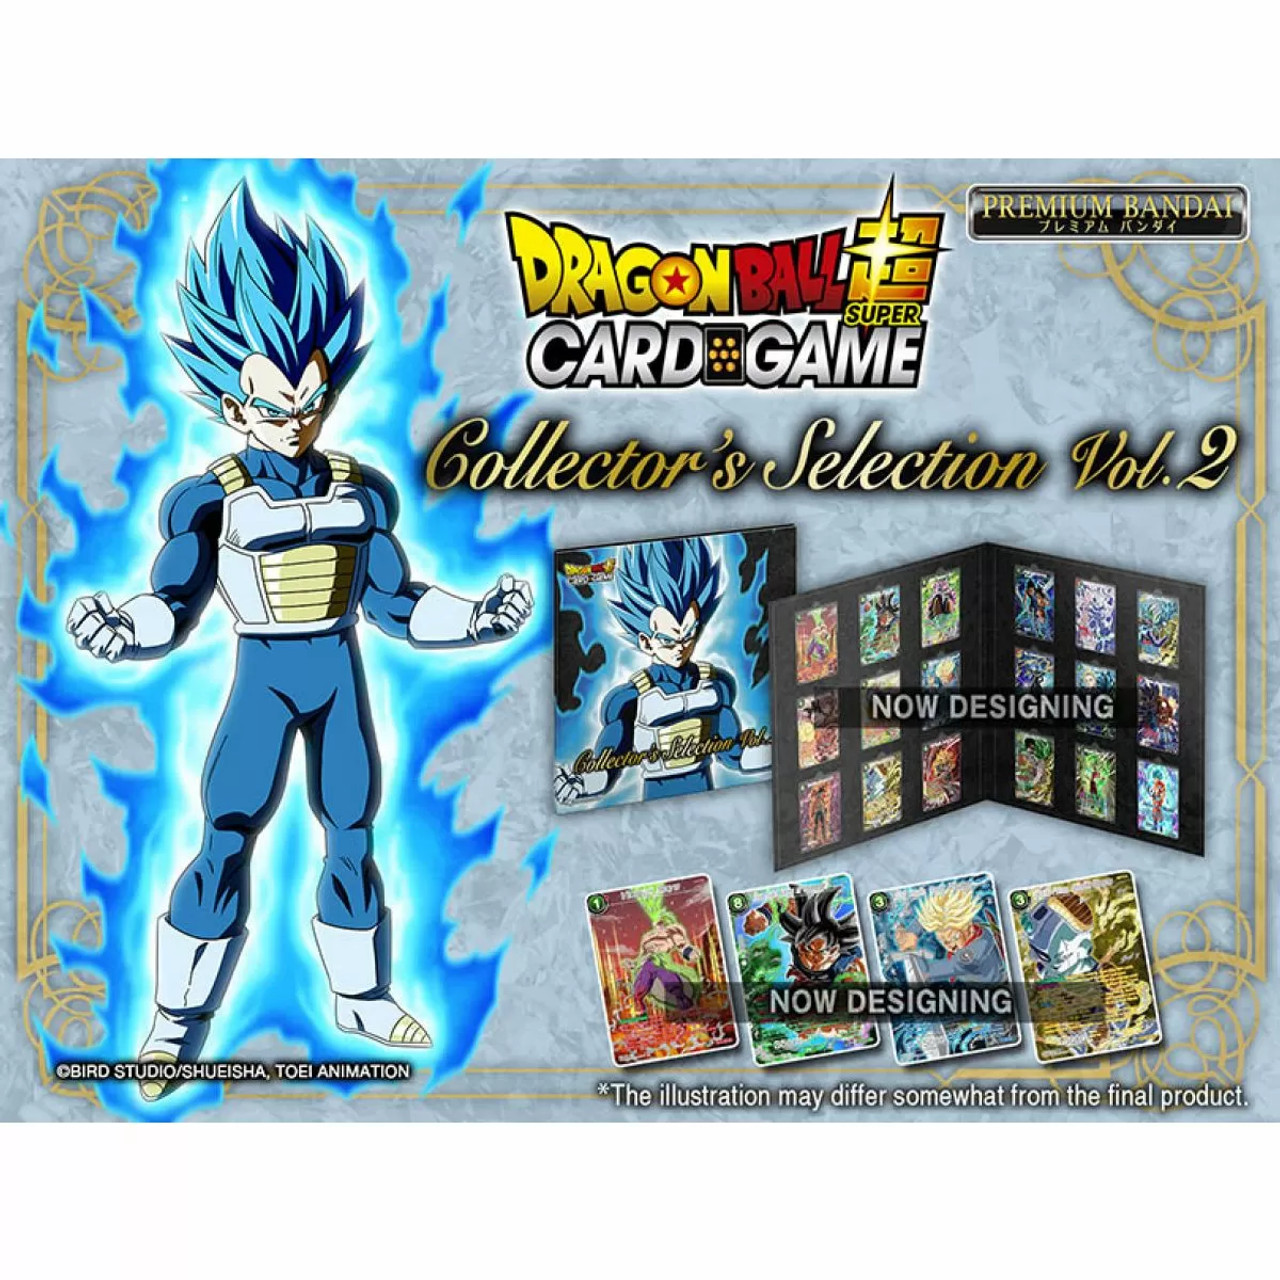 NEW CODE REDEMPTION!!! FREE SPIRIT - Dragon Ball The Breakers 